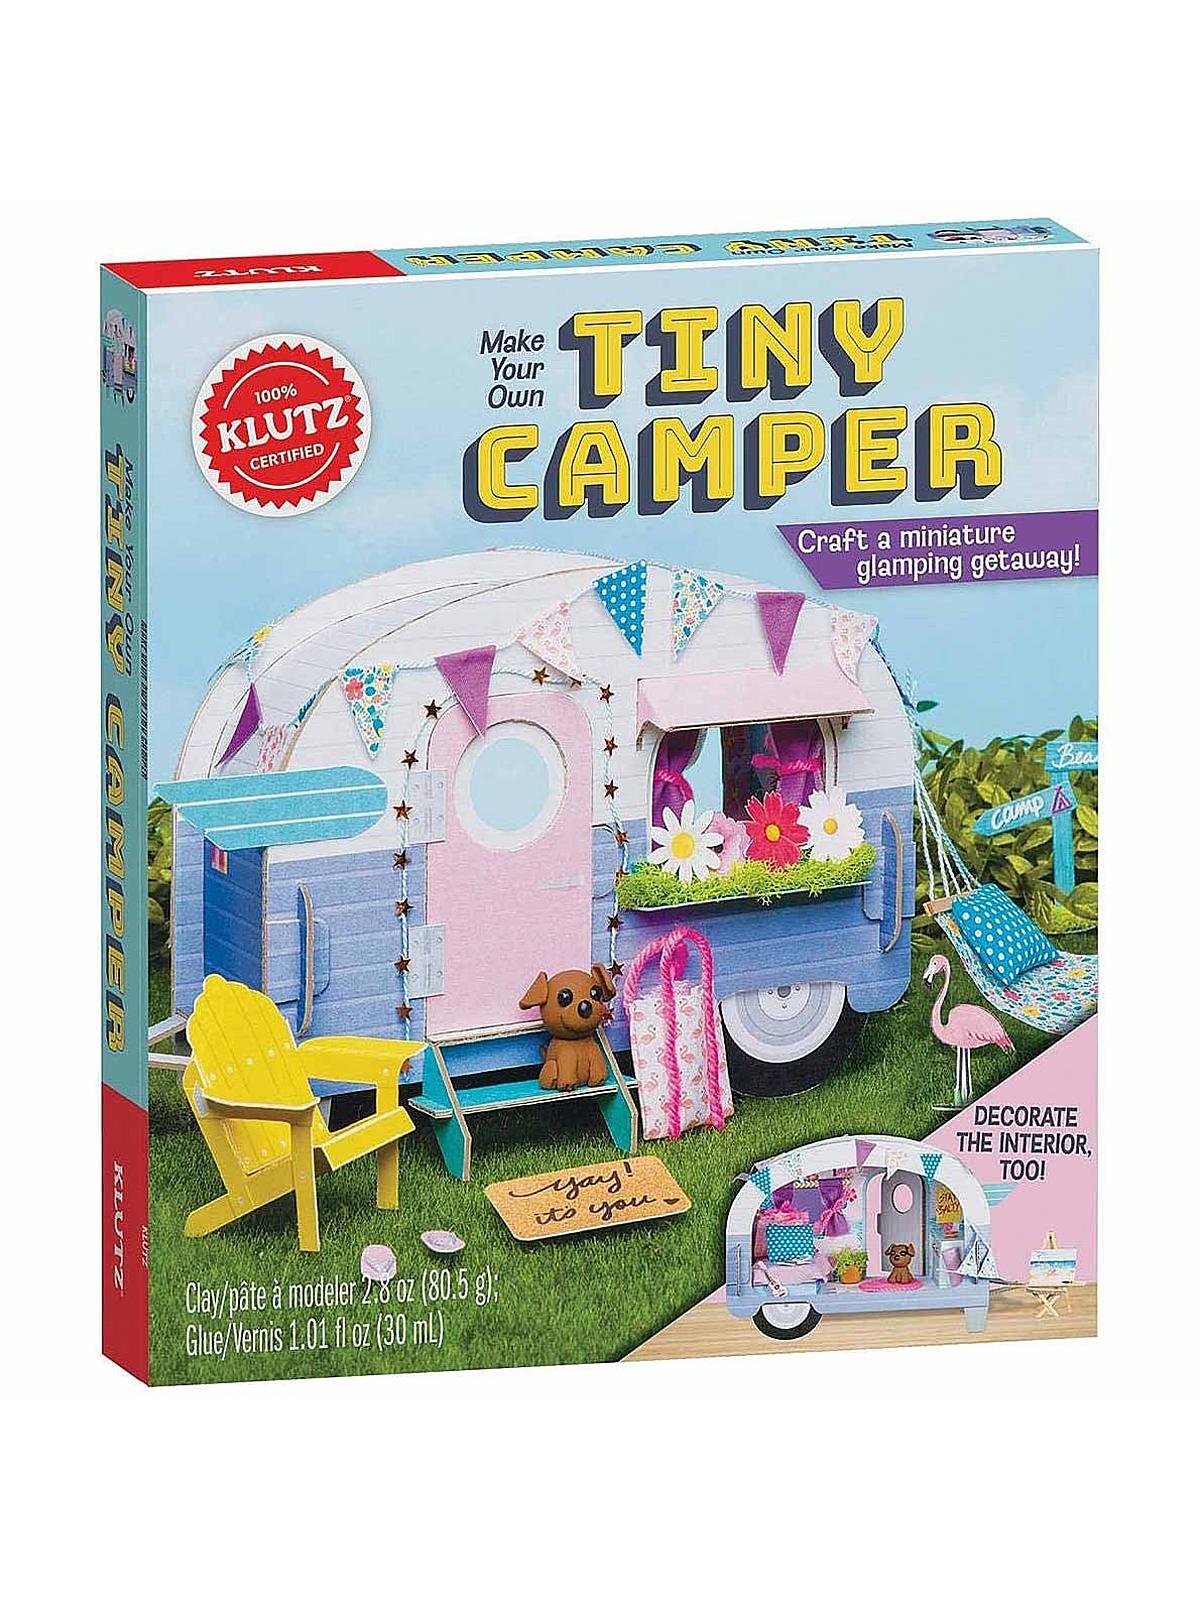 Make Your Own Tiny Camper Each